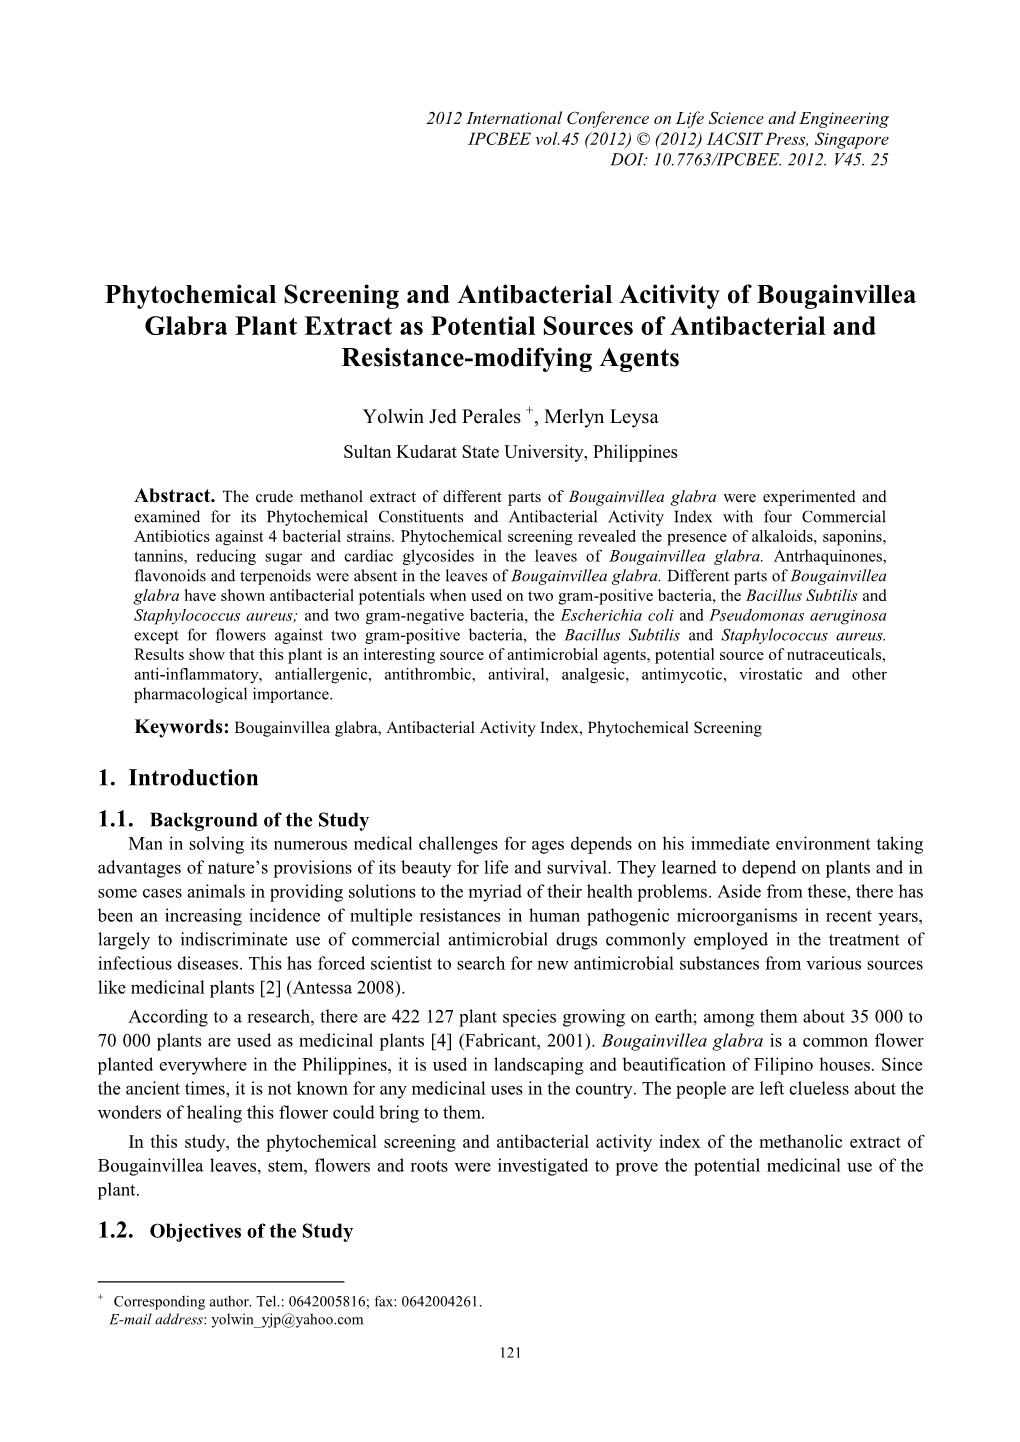 Phytochemical Screening and Antibacterial Acitivity of Bougainvillea Glabra Plant Extract As Potential Sources of Antibacterial and Resistance-Modifying Agents